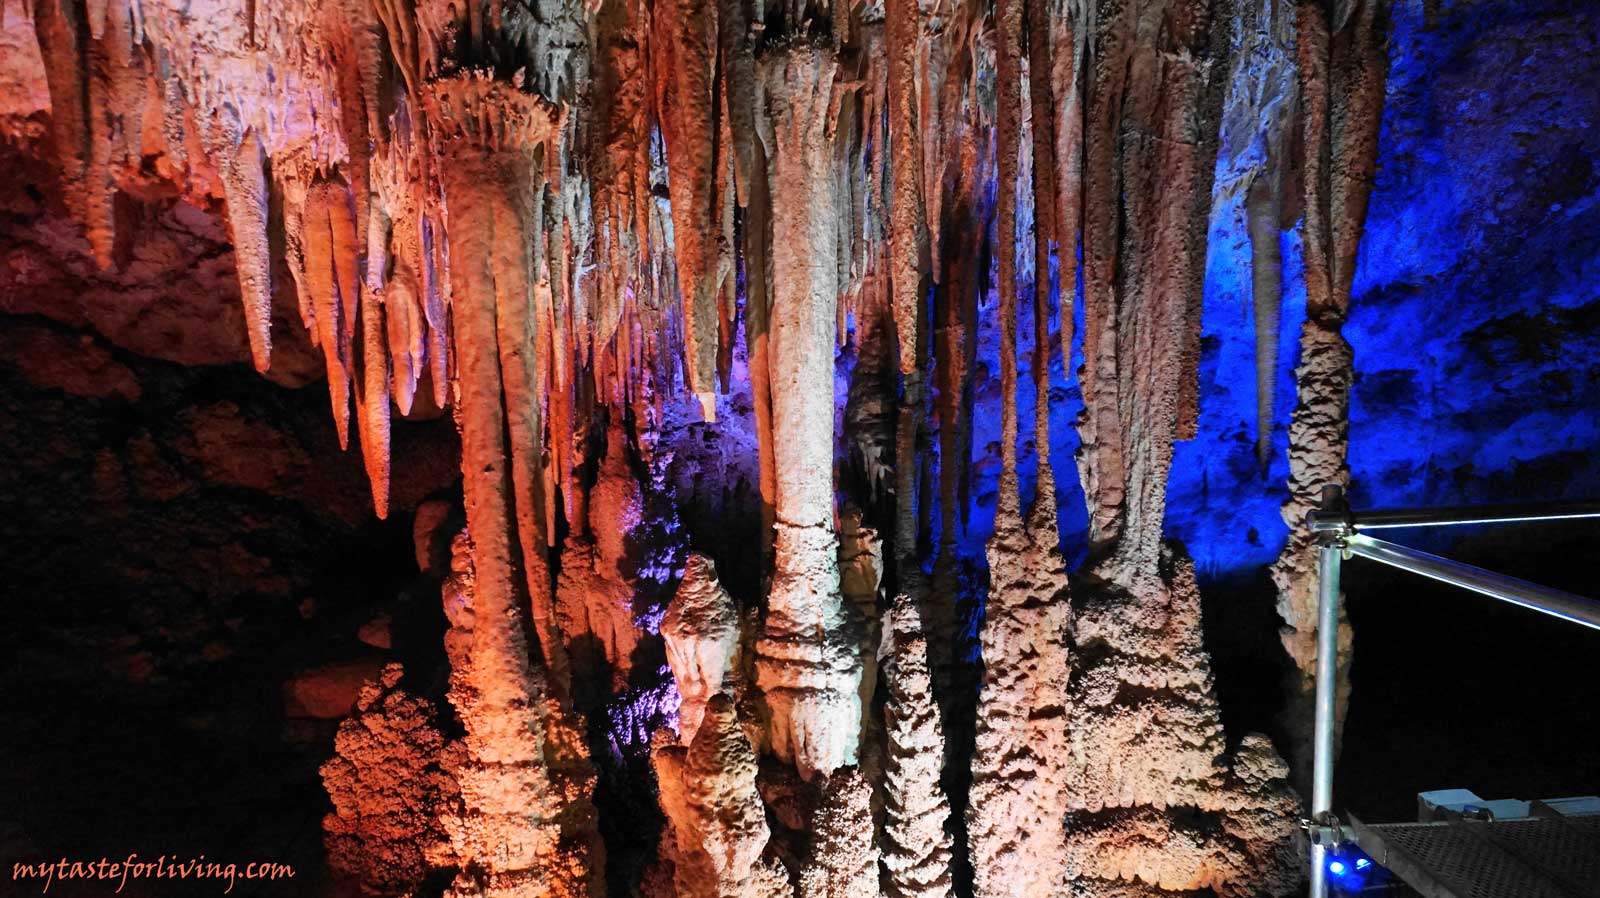 "Venetsa" cave is among the most beautiful caves in Bulgaria. It is located in Dimovo municipality, Vidin district, near the village of Oreshets and about 15 km away from the town of Belogradchik, Bulgaria.